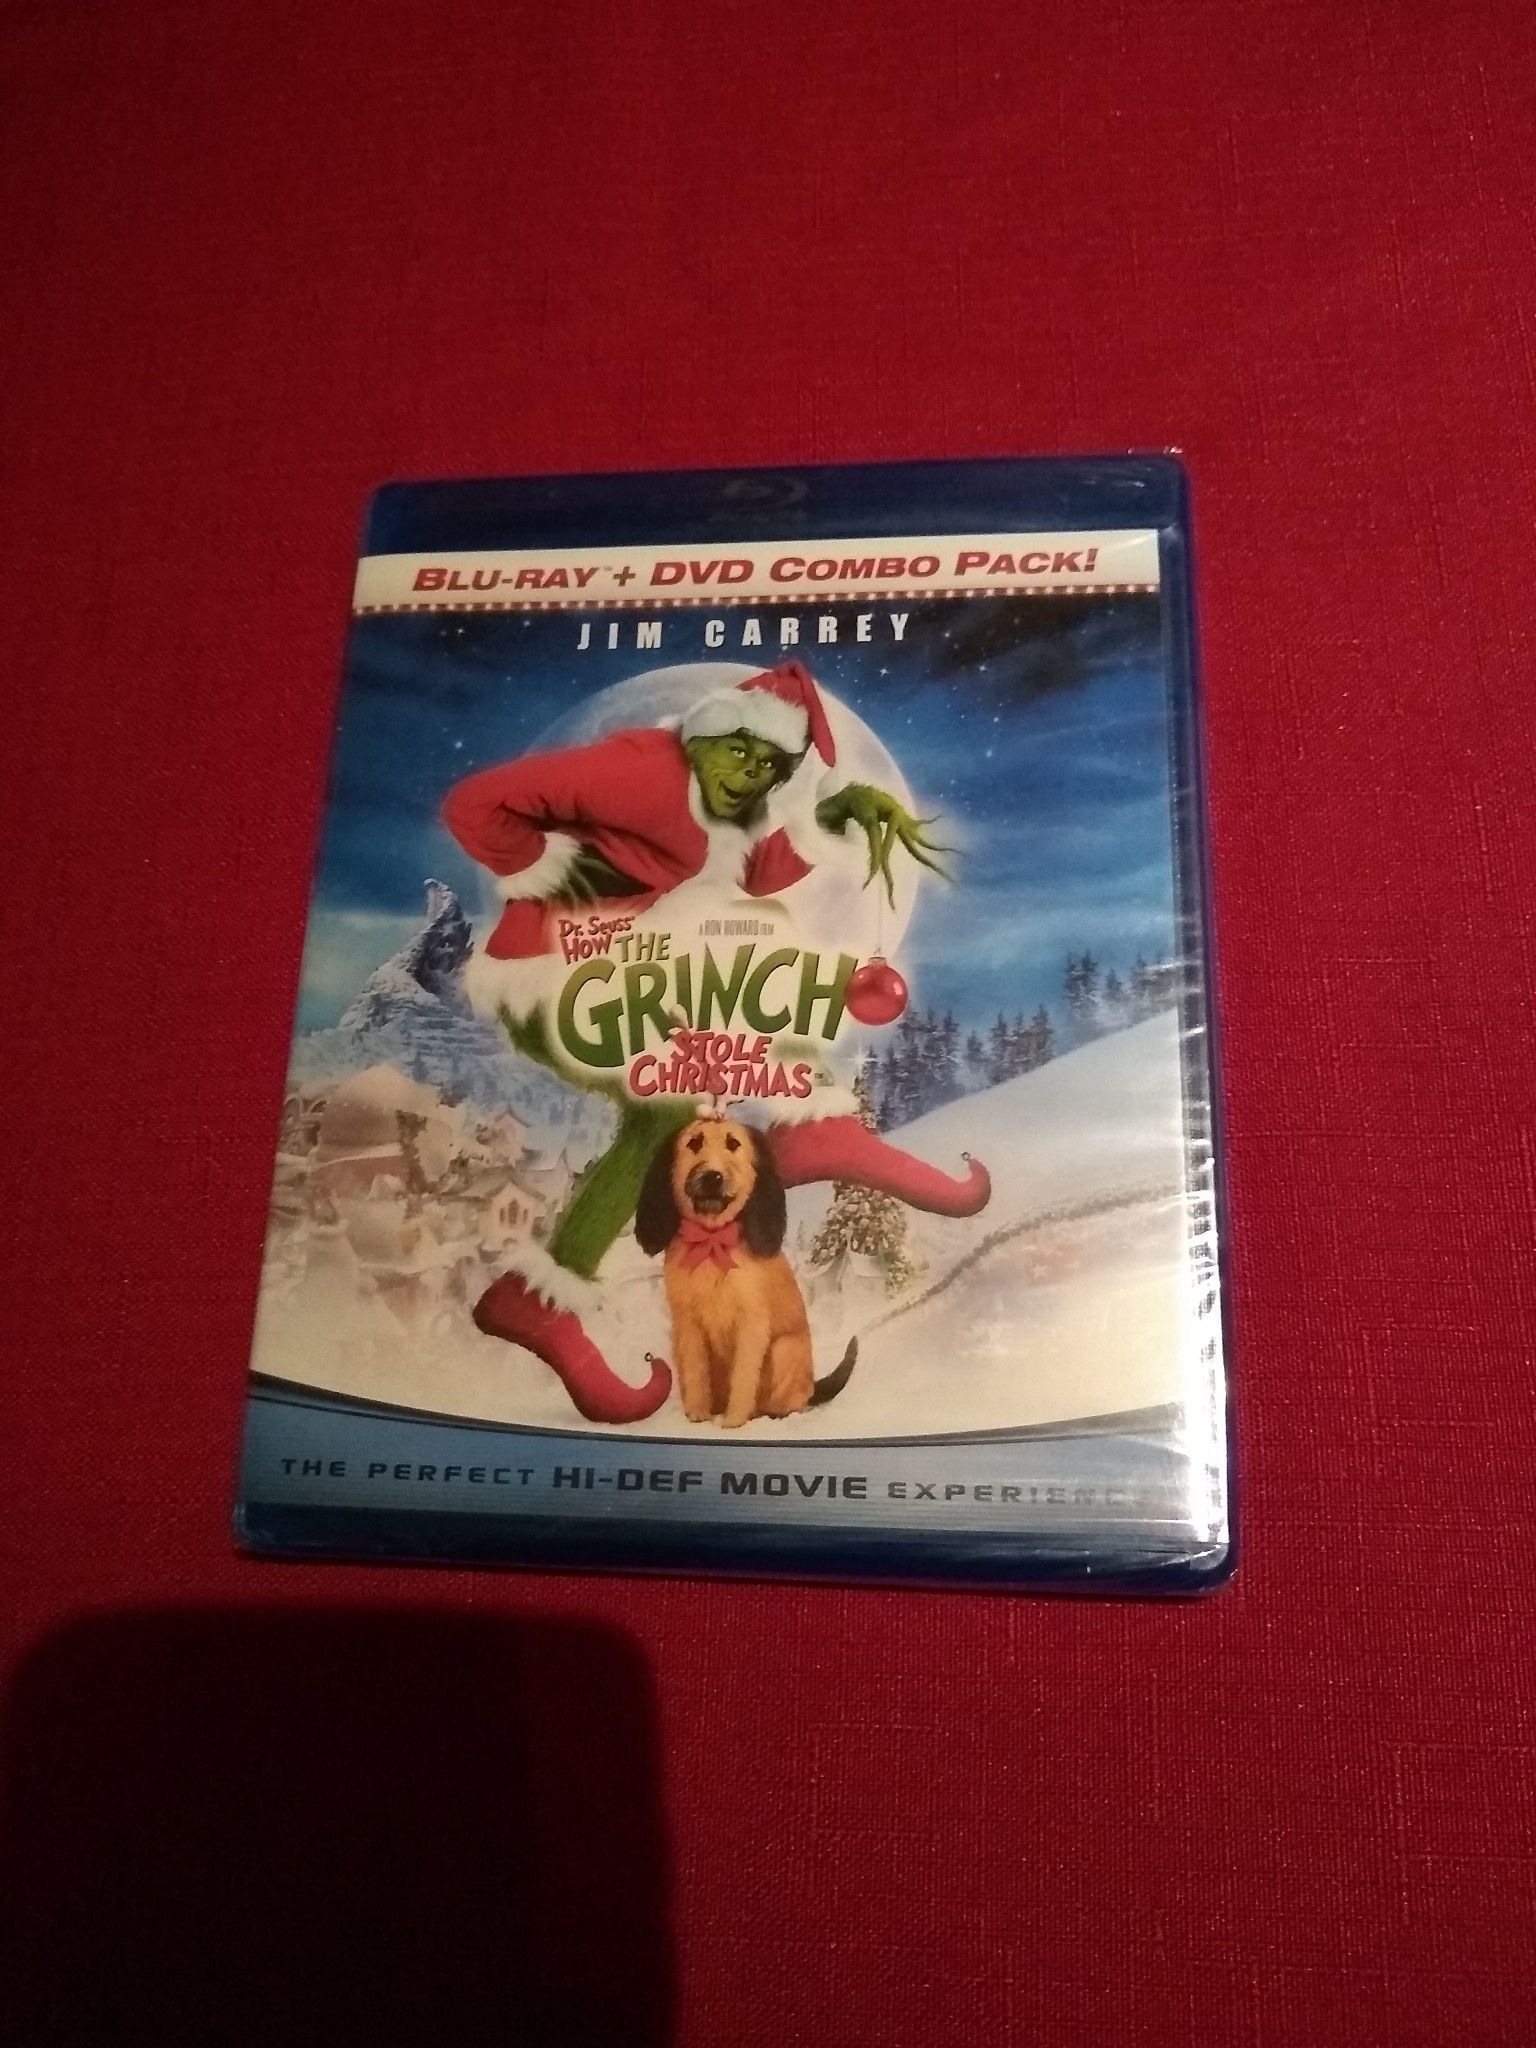 How the Grinch Stole Christmas (Blu-ray Combo)